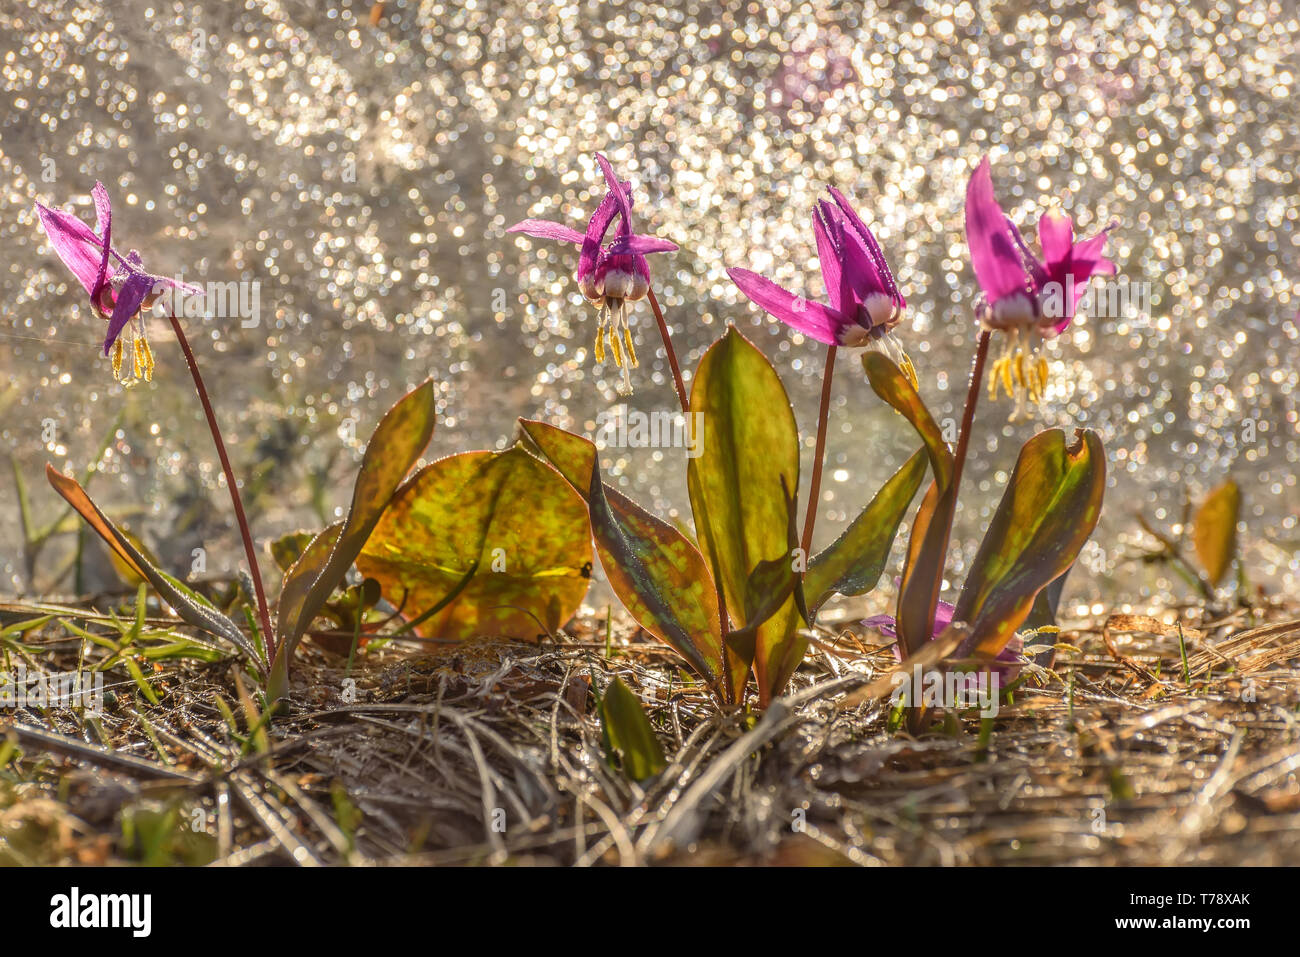 Amazing floral background with the first spring burgundy wild flowers of Erythronium sibiricum with rain drops in the meadow close-up with sun glare Stock Photo